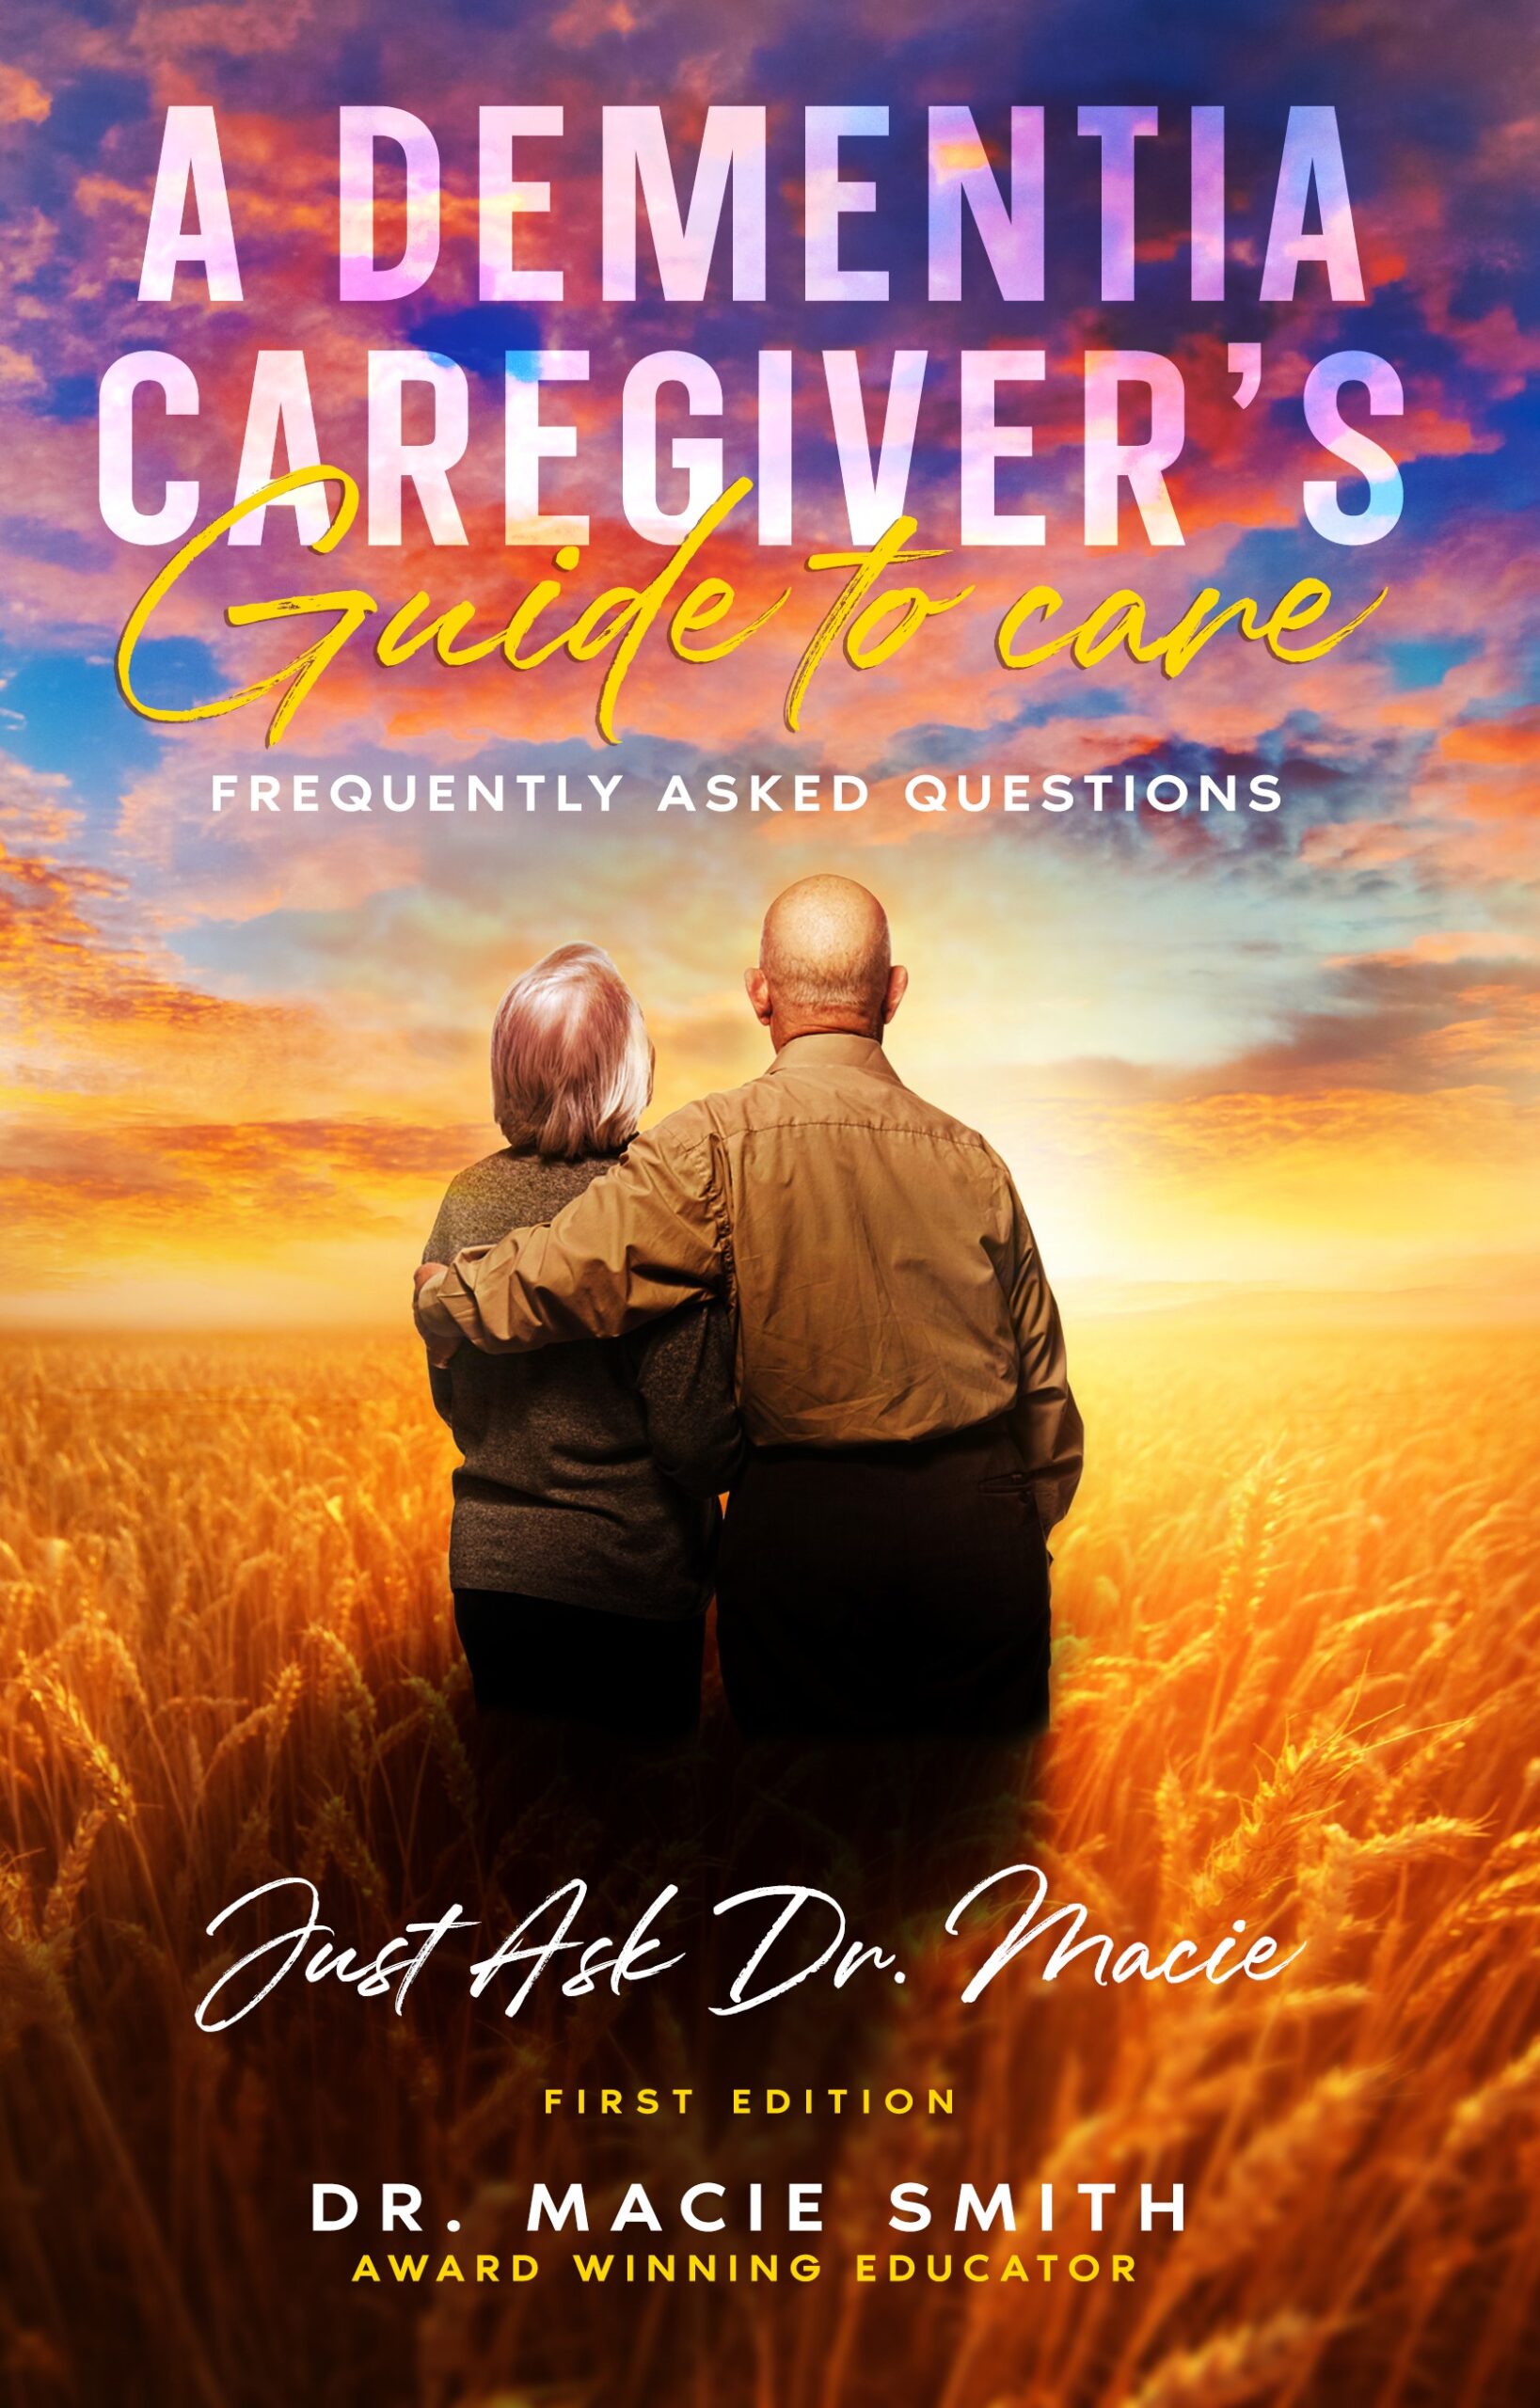 A Dementia Caregiver's Guide to Care by Dr. Macie Smith